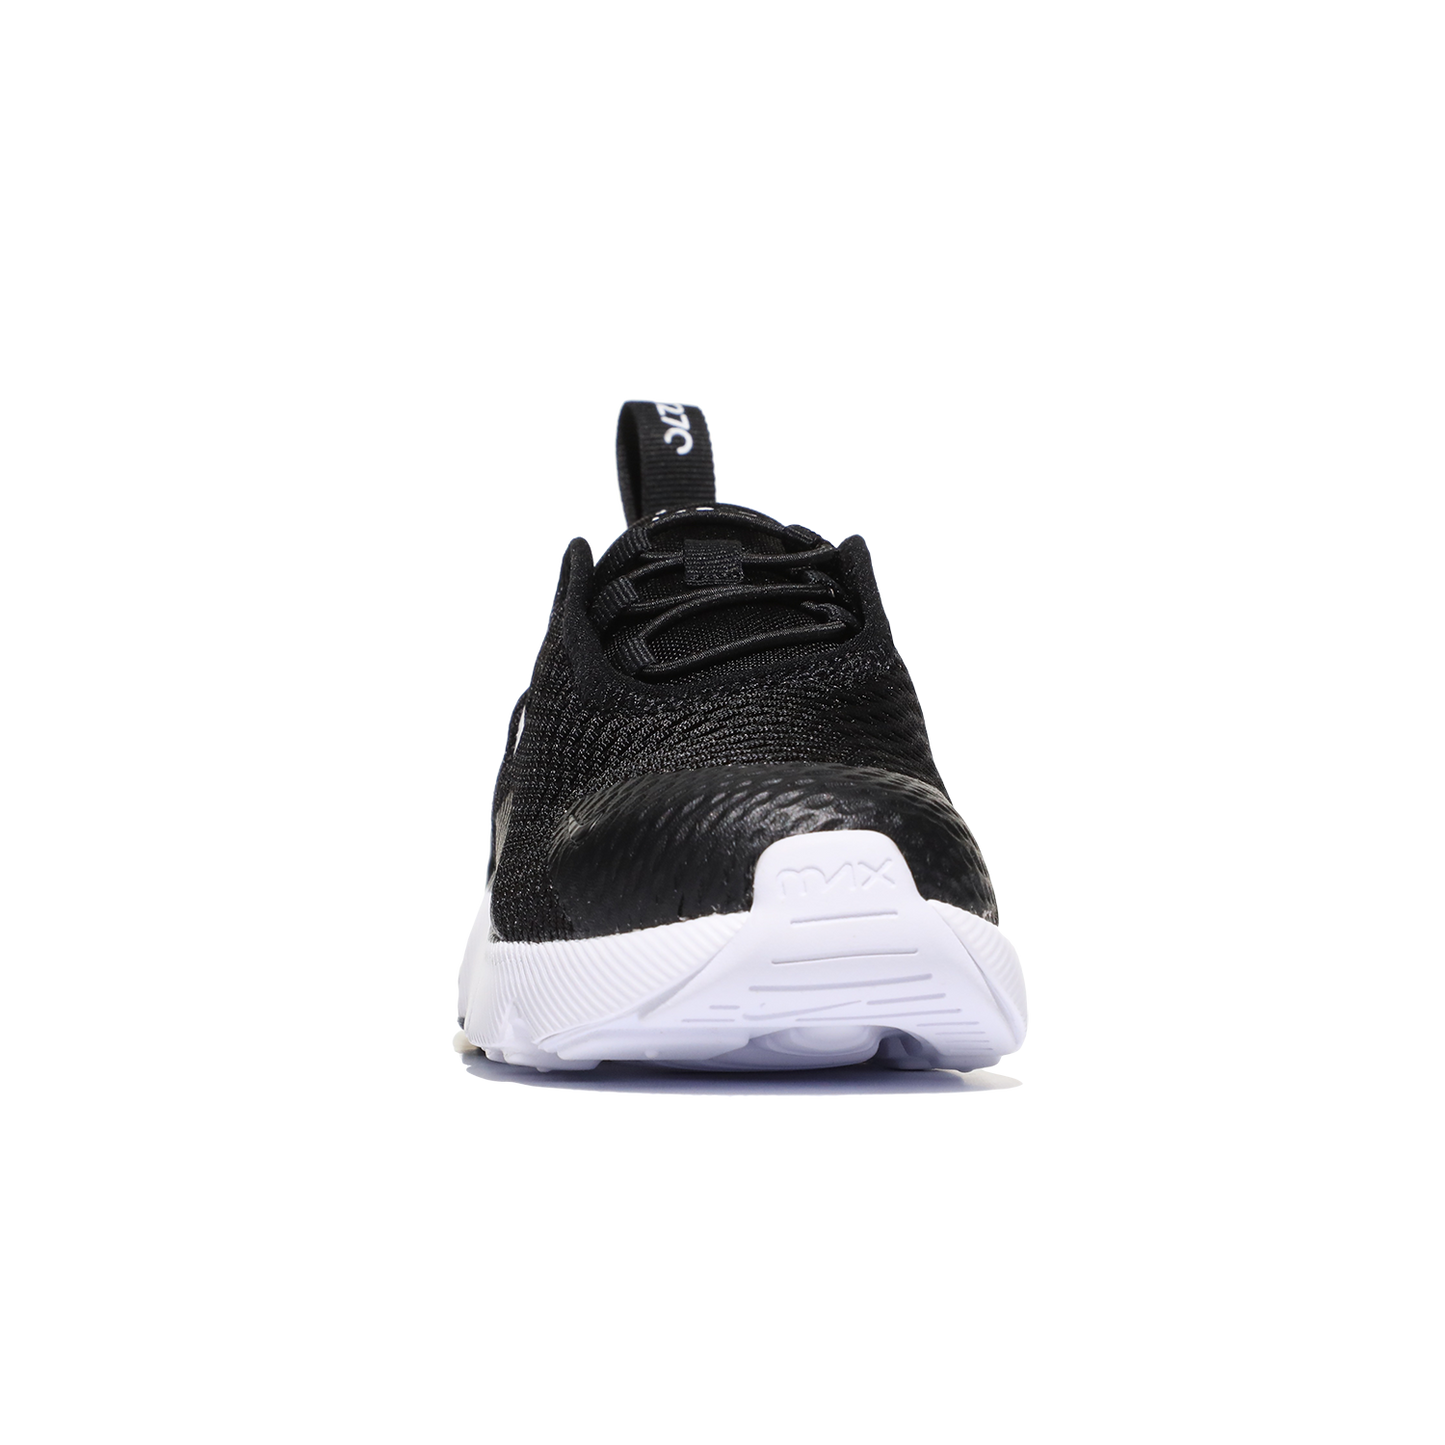 Image 4 of Air Max 270 (Infant/Toddler)